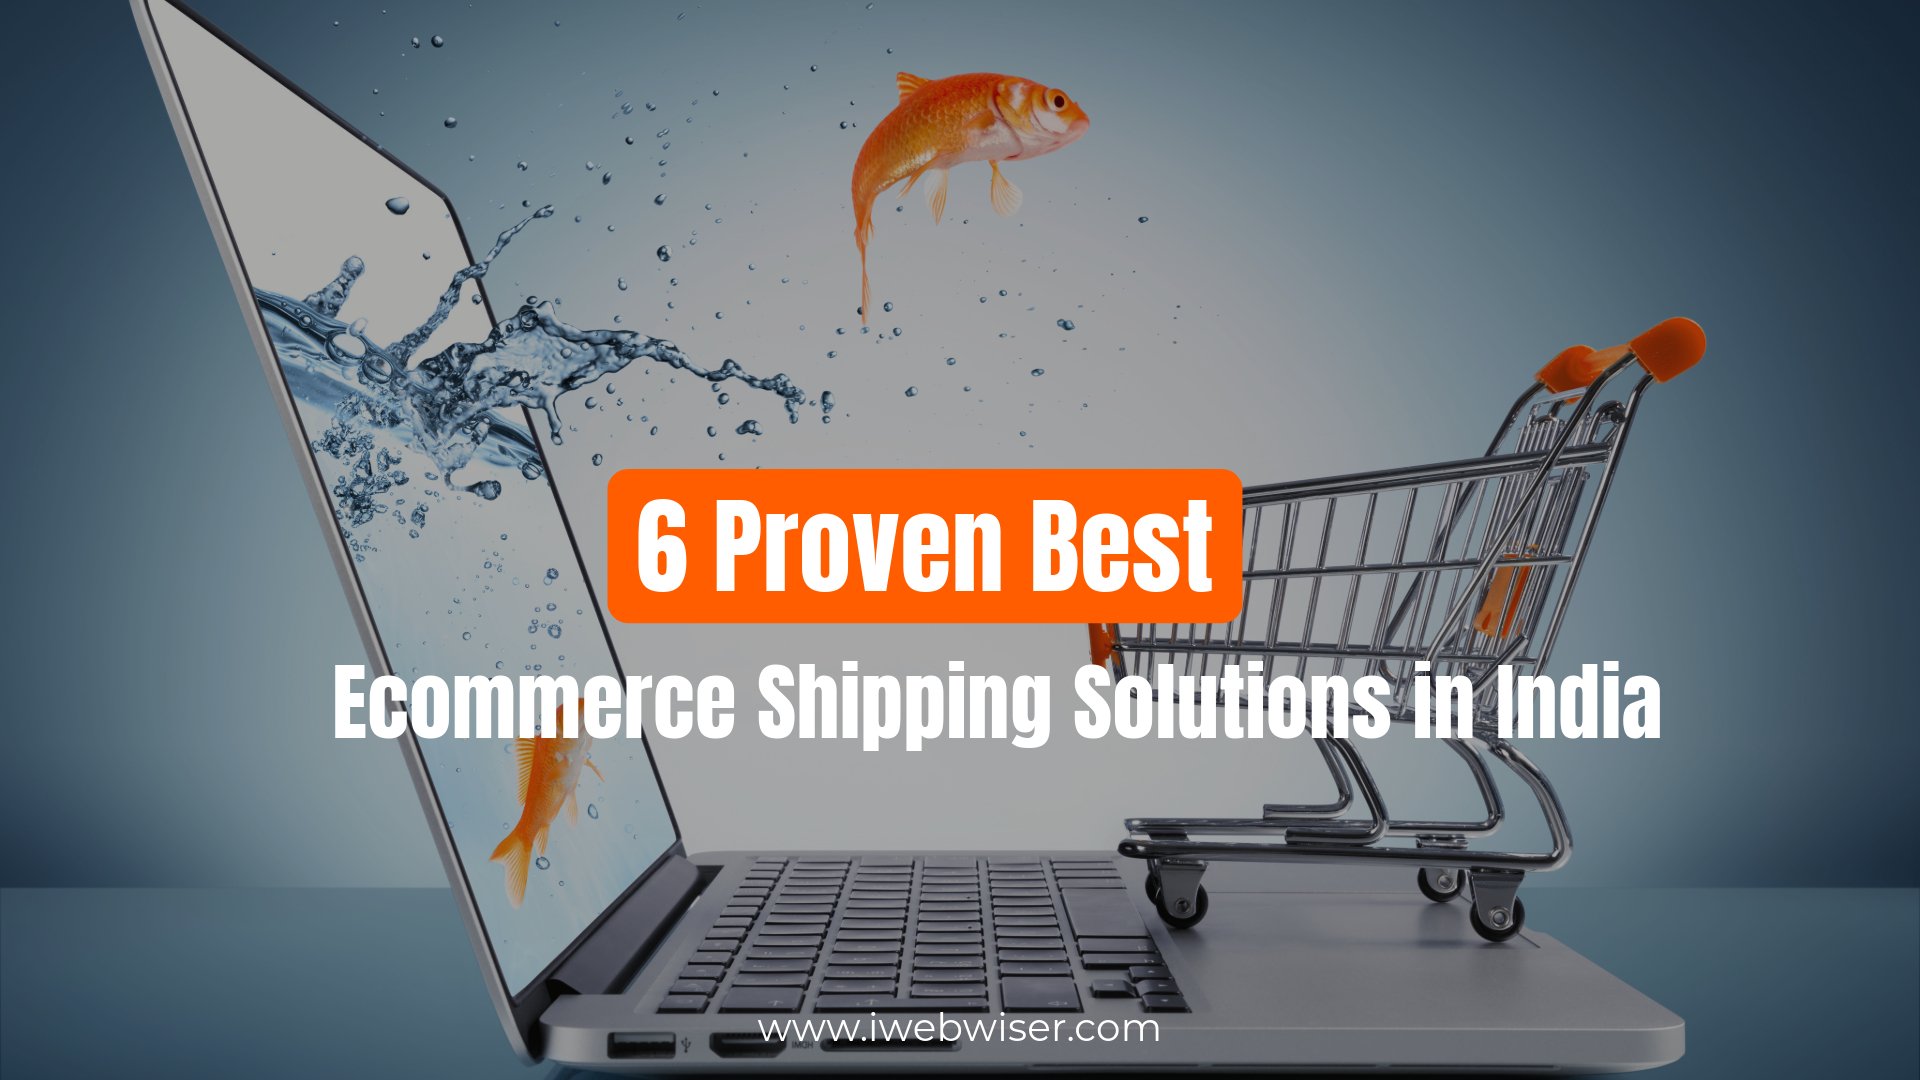 6 Proven Best Ecommerce Shipping Solutions in India